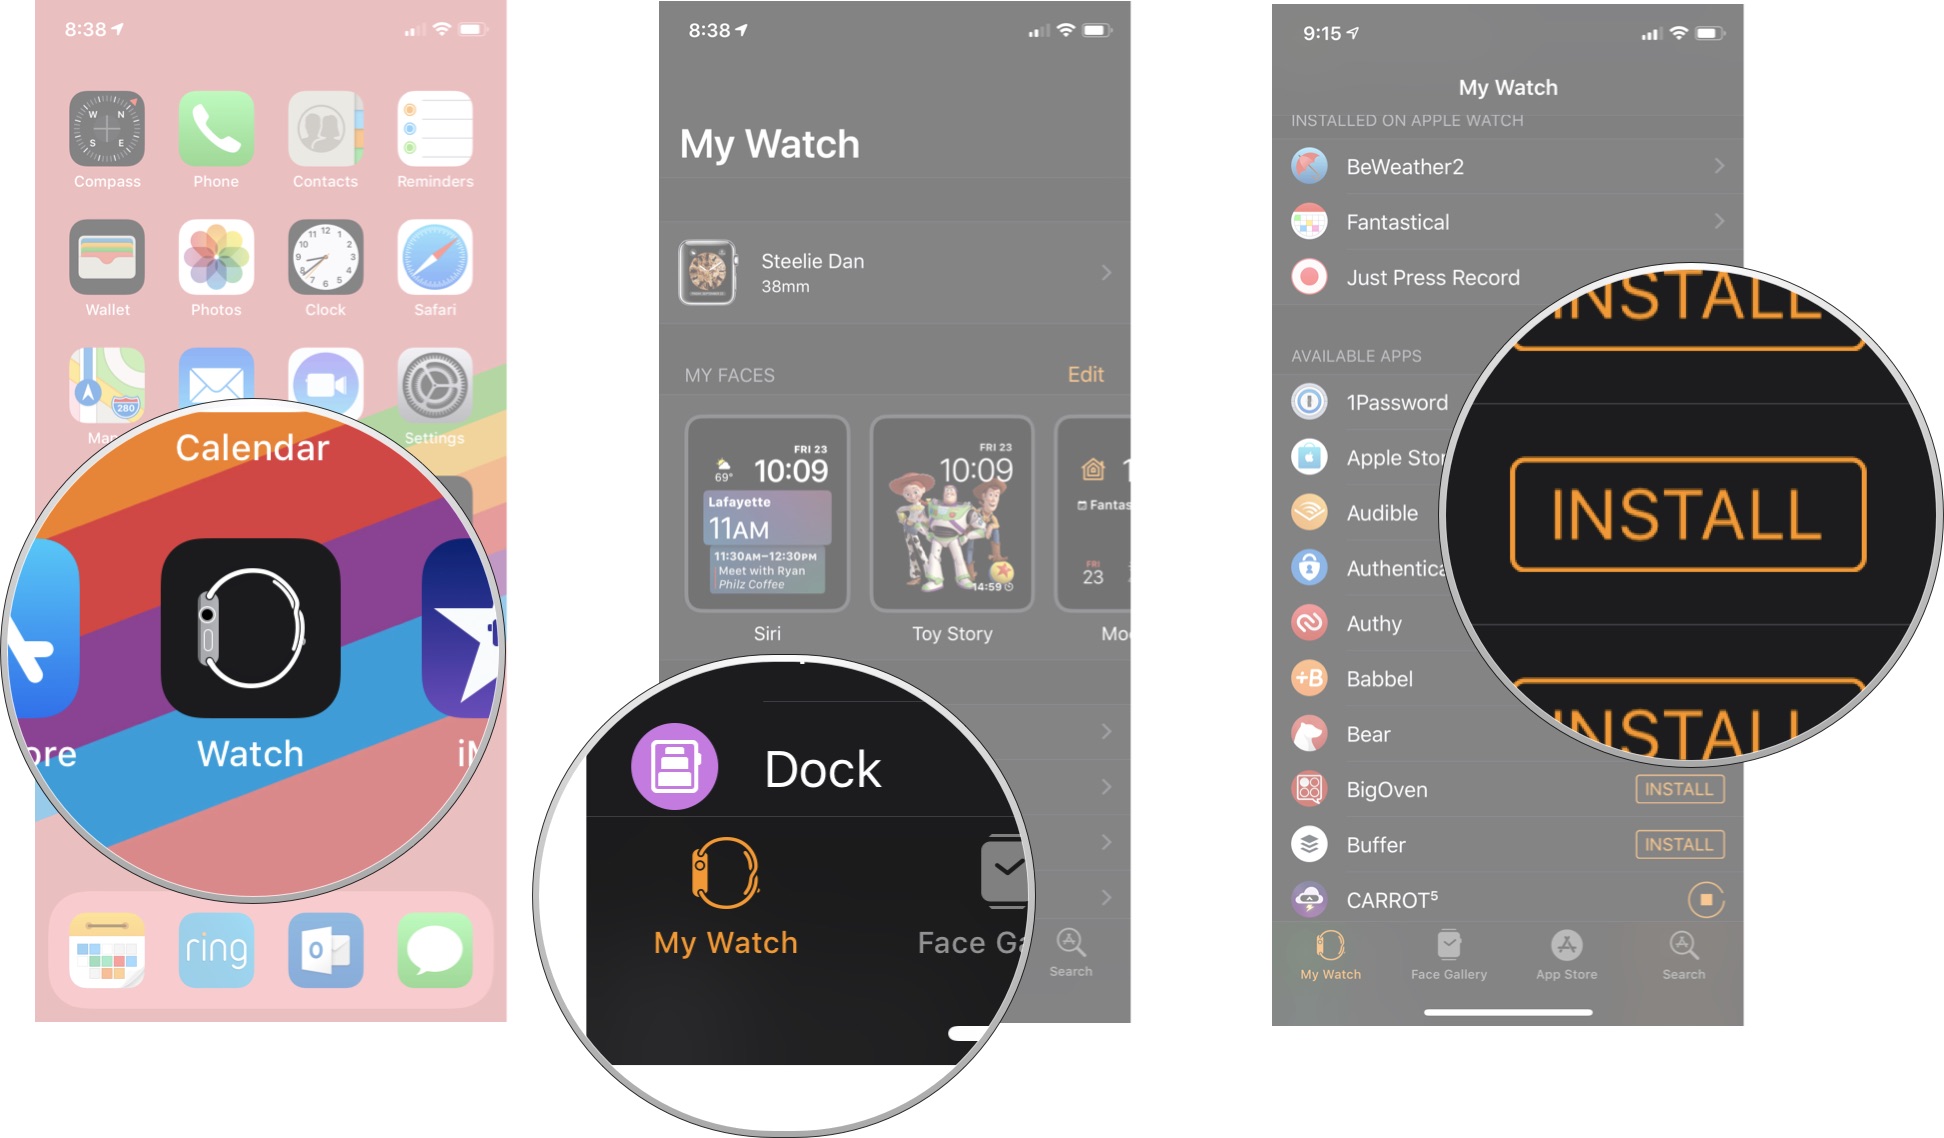 Launch the Watch app, then tap My Watch, then tap Install next to Audible